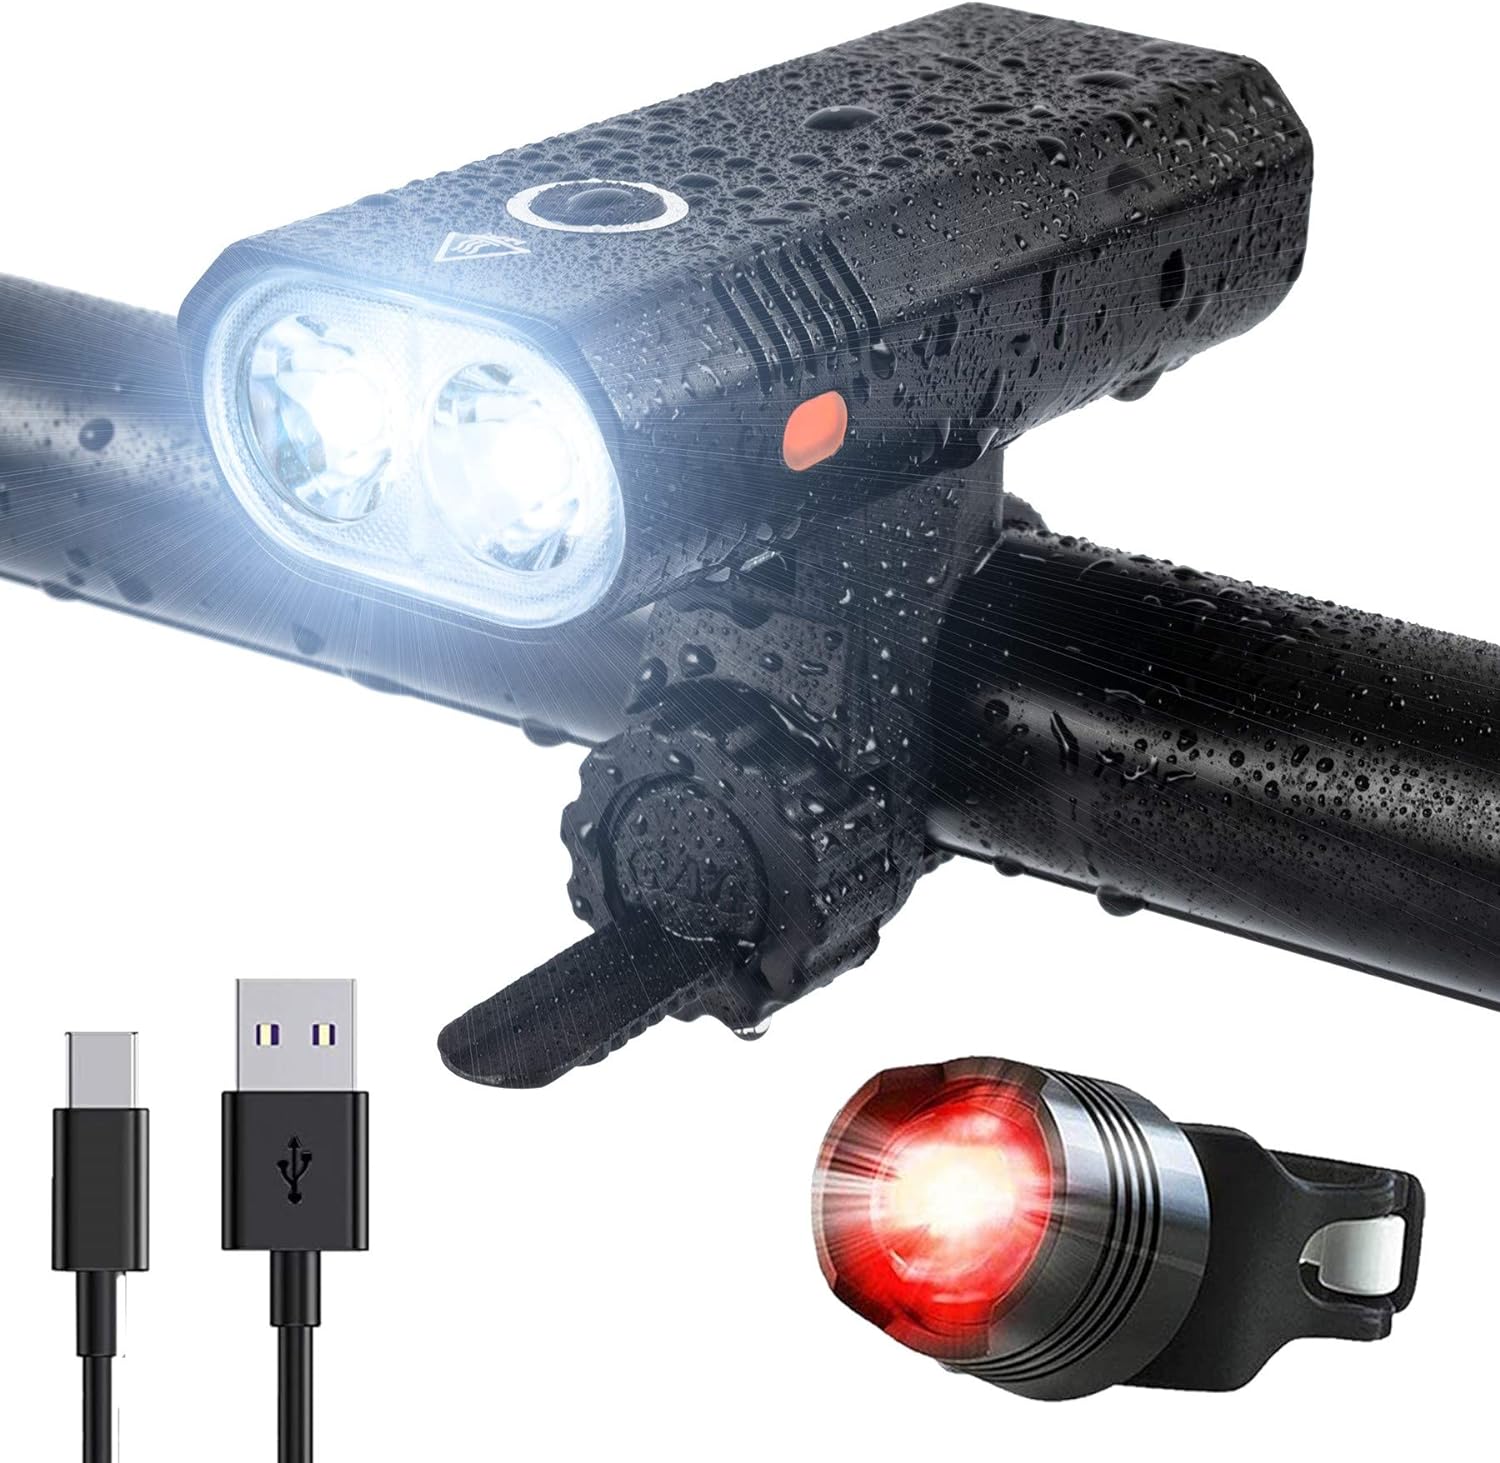 WATERPROOF BRIGHT LED BIKE BICYCLE CYCLE FRONT REAR BACK LIGHT LIGHTS HEADLIGHT 